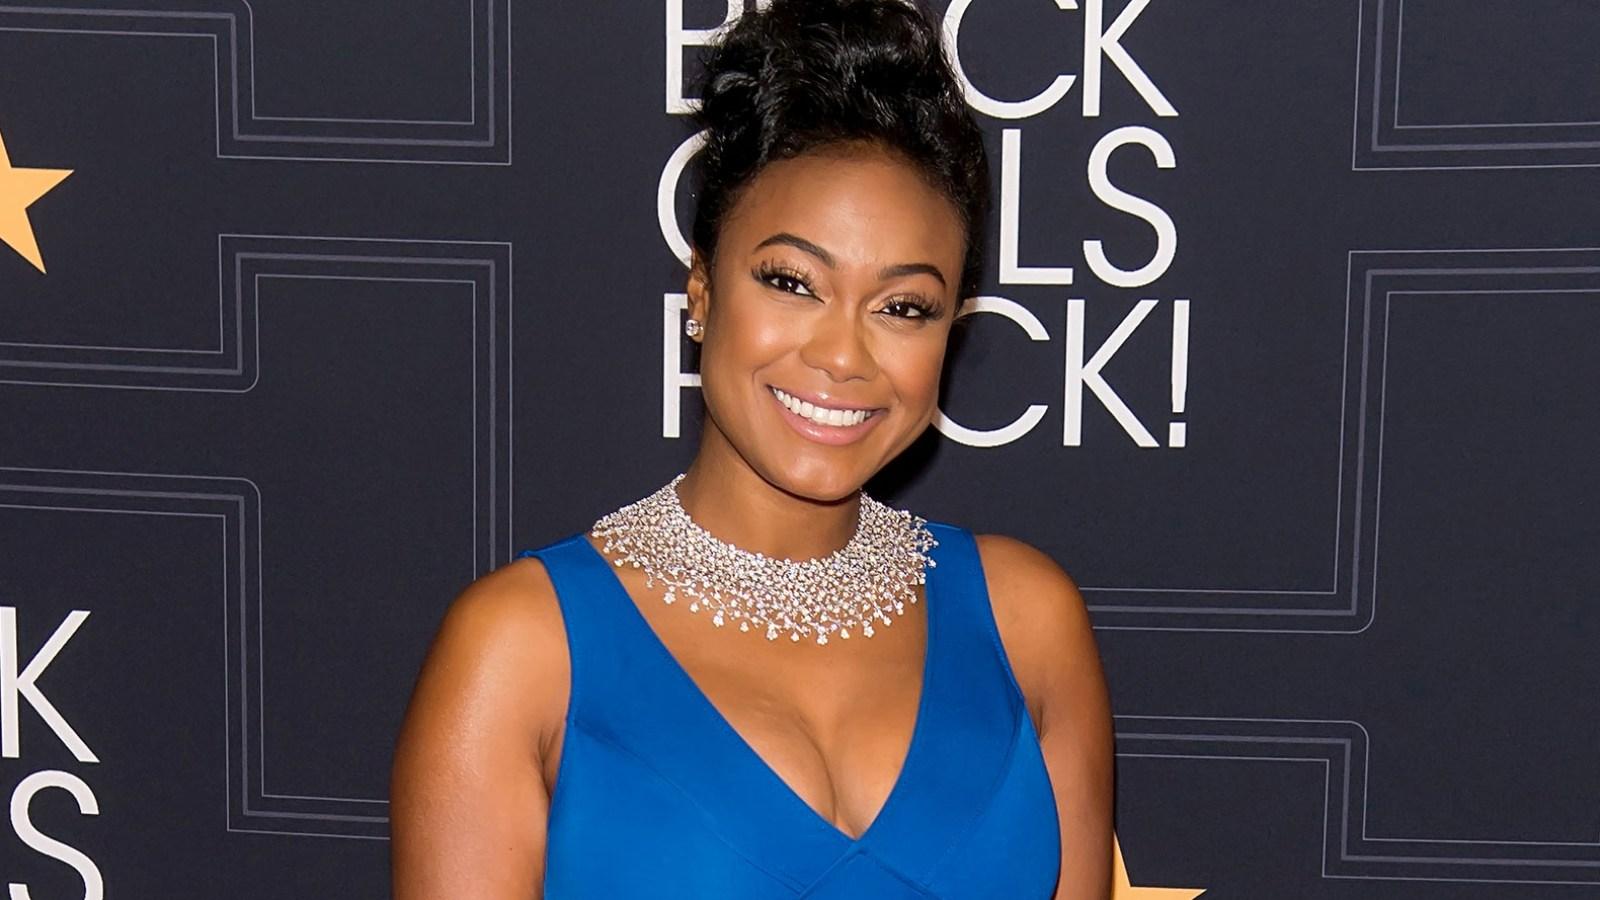 60+ Hot And Sexy Pictures Of Tatyana Ali Will Boggle Your Mind With Her Hotness | Best Of Comic Books